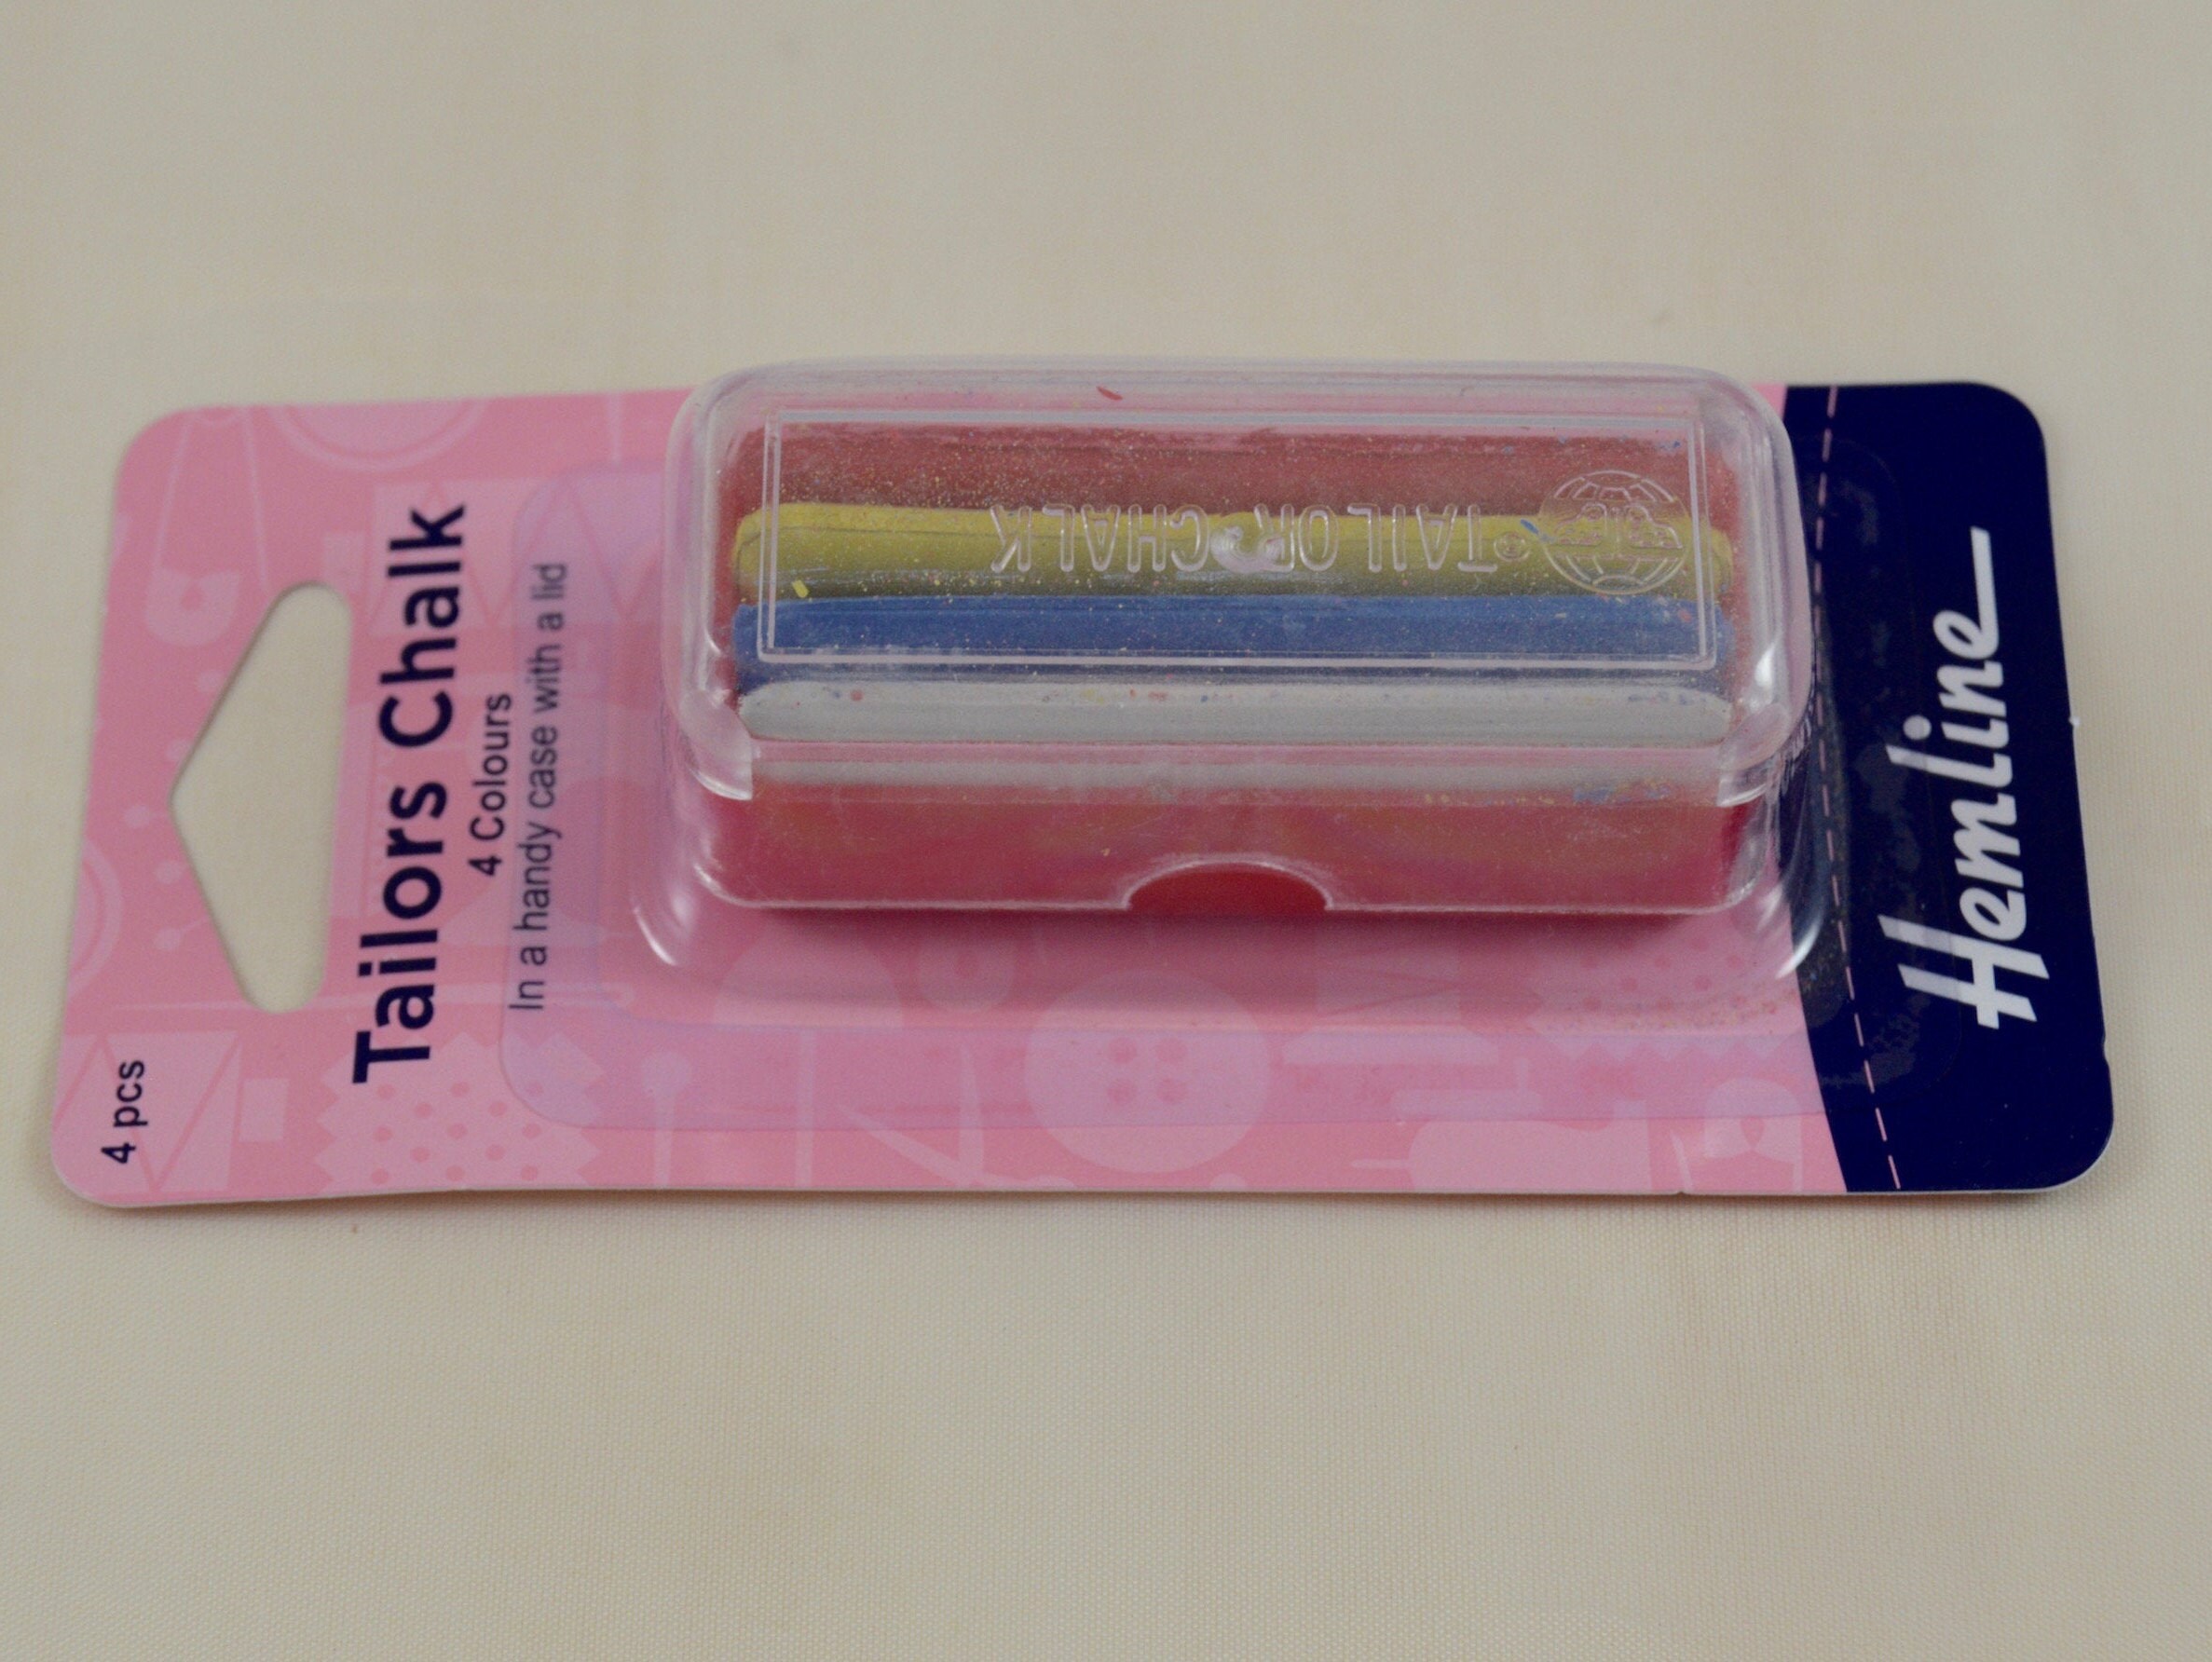 Dritz Tailor's Chalk Pencil with Three Colors of Chalk